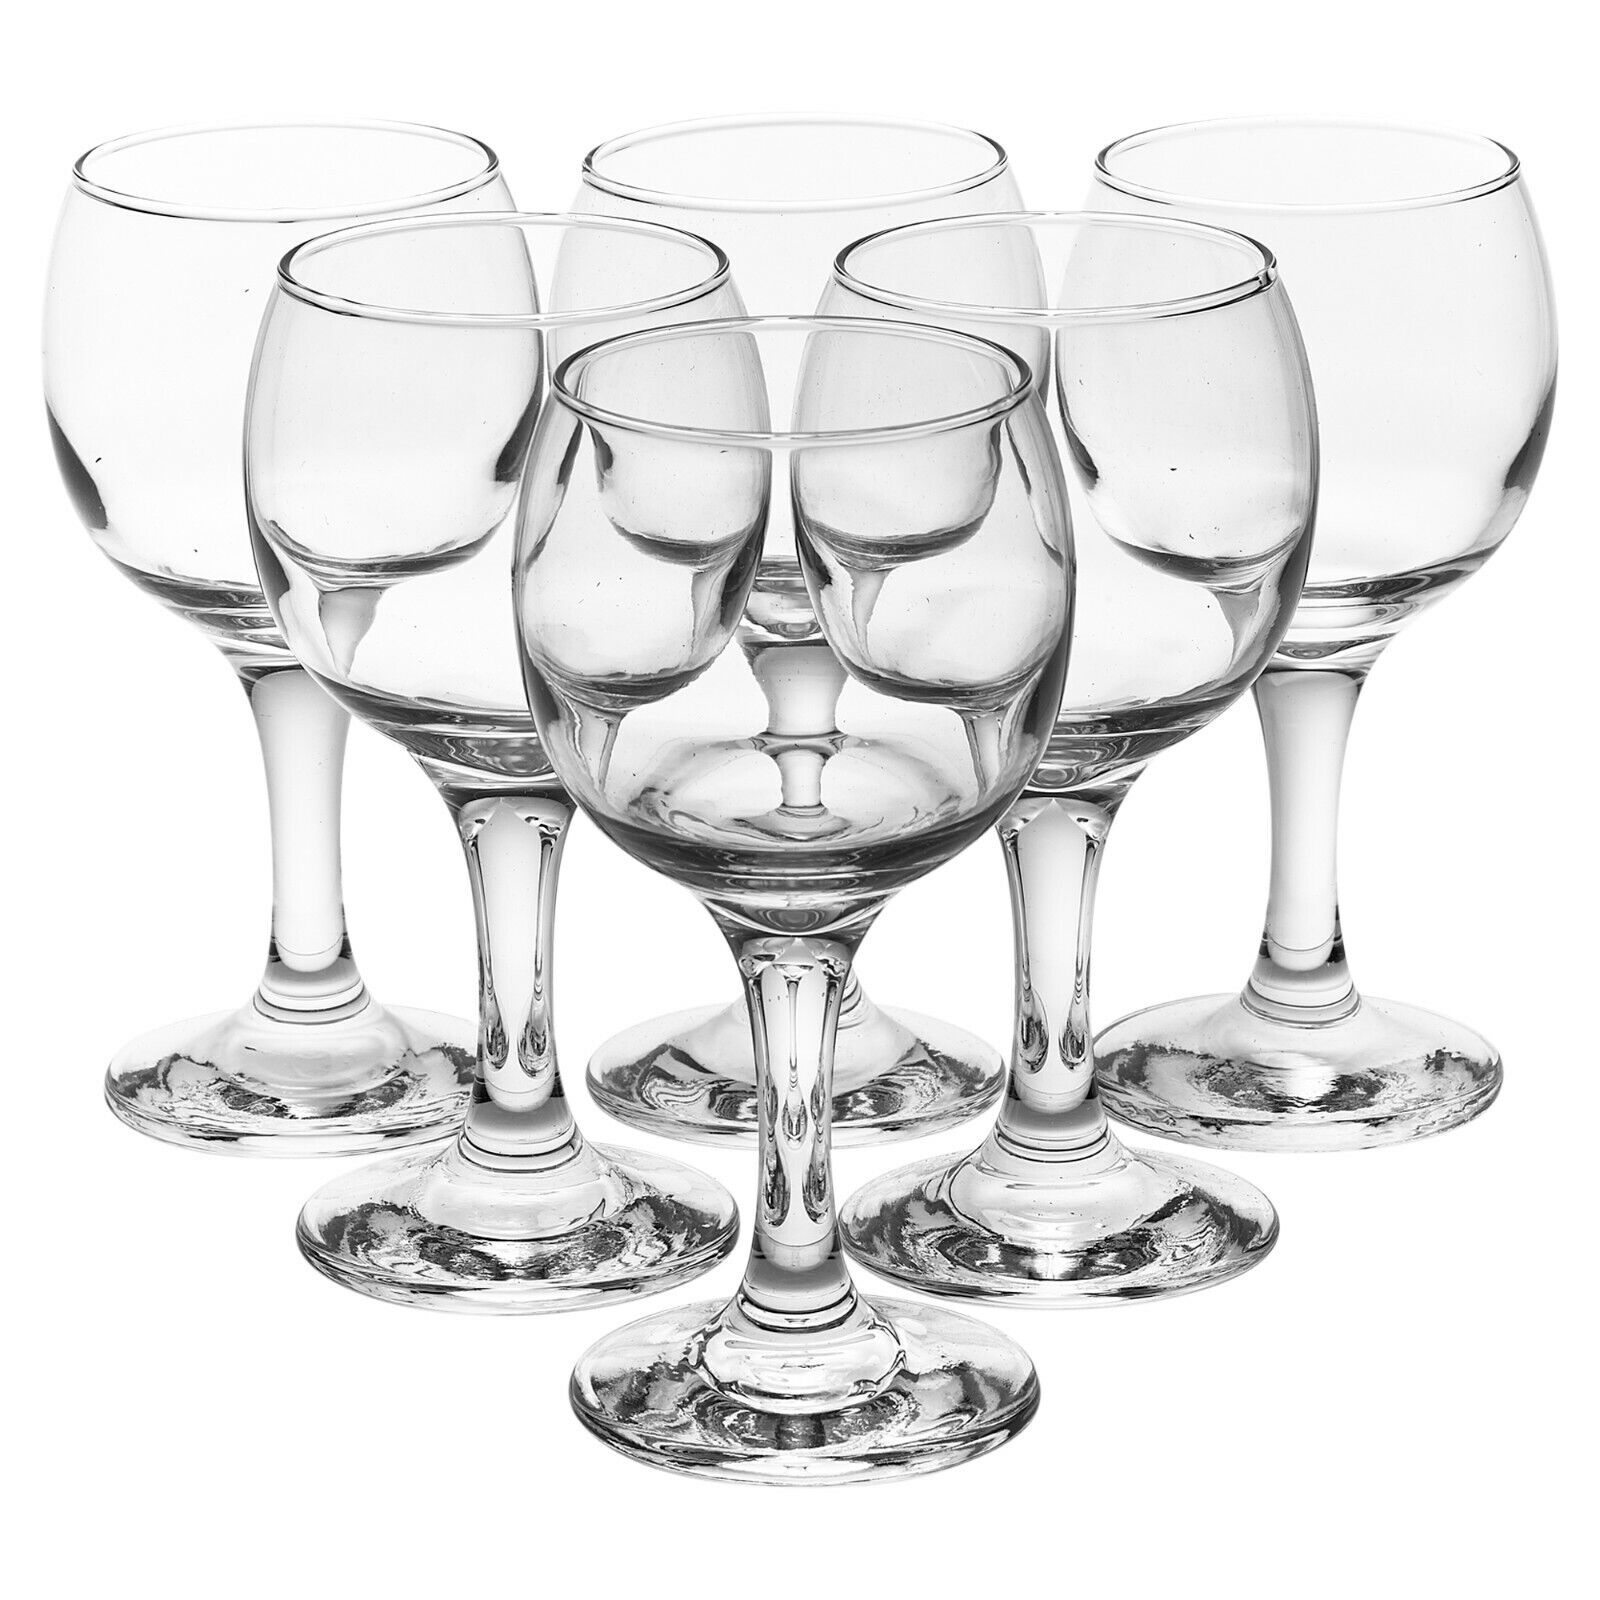 6 Piece Wine Glasses Goblet Set Pasabahce Stemmed Red White Wine Dinner Cups